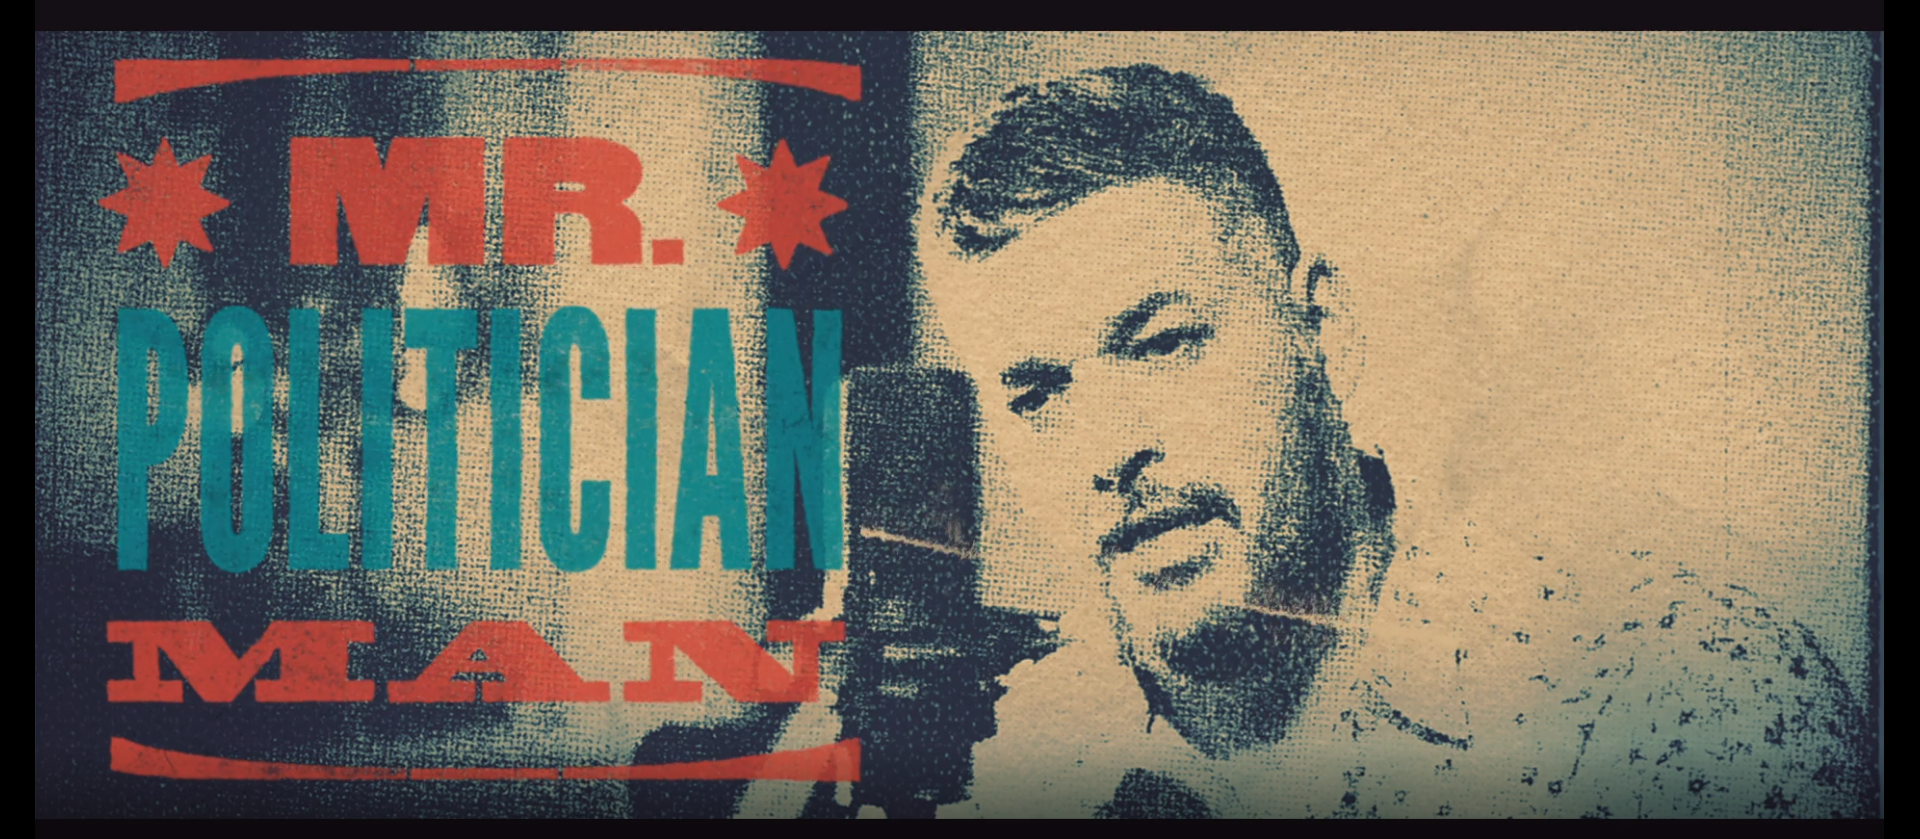 Graphic that says "Mr. Politician Man" with a photo of Adrian Sutherland